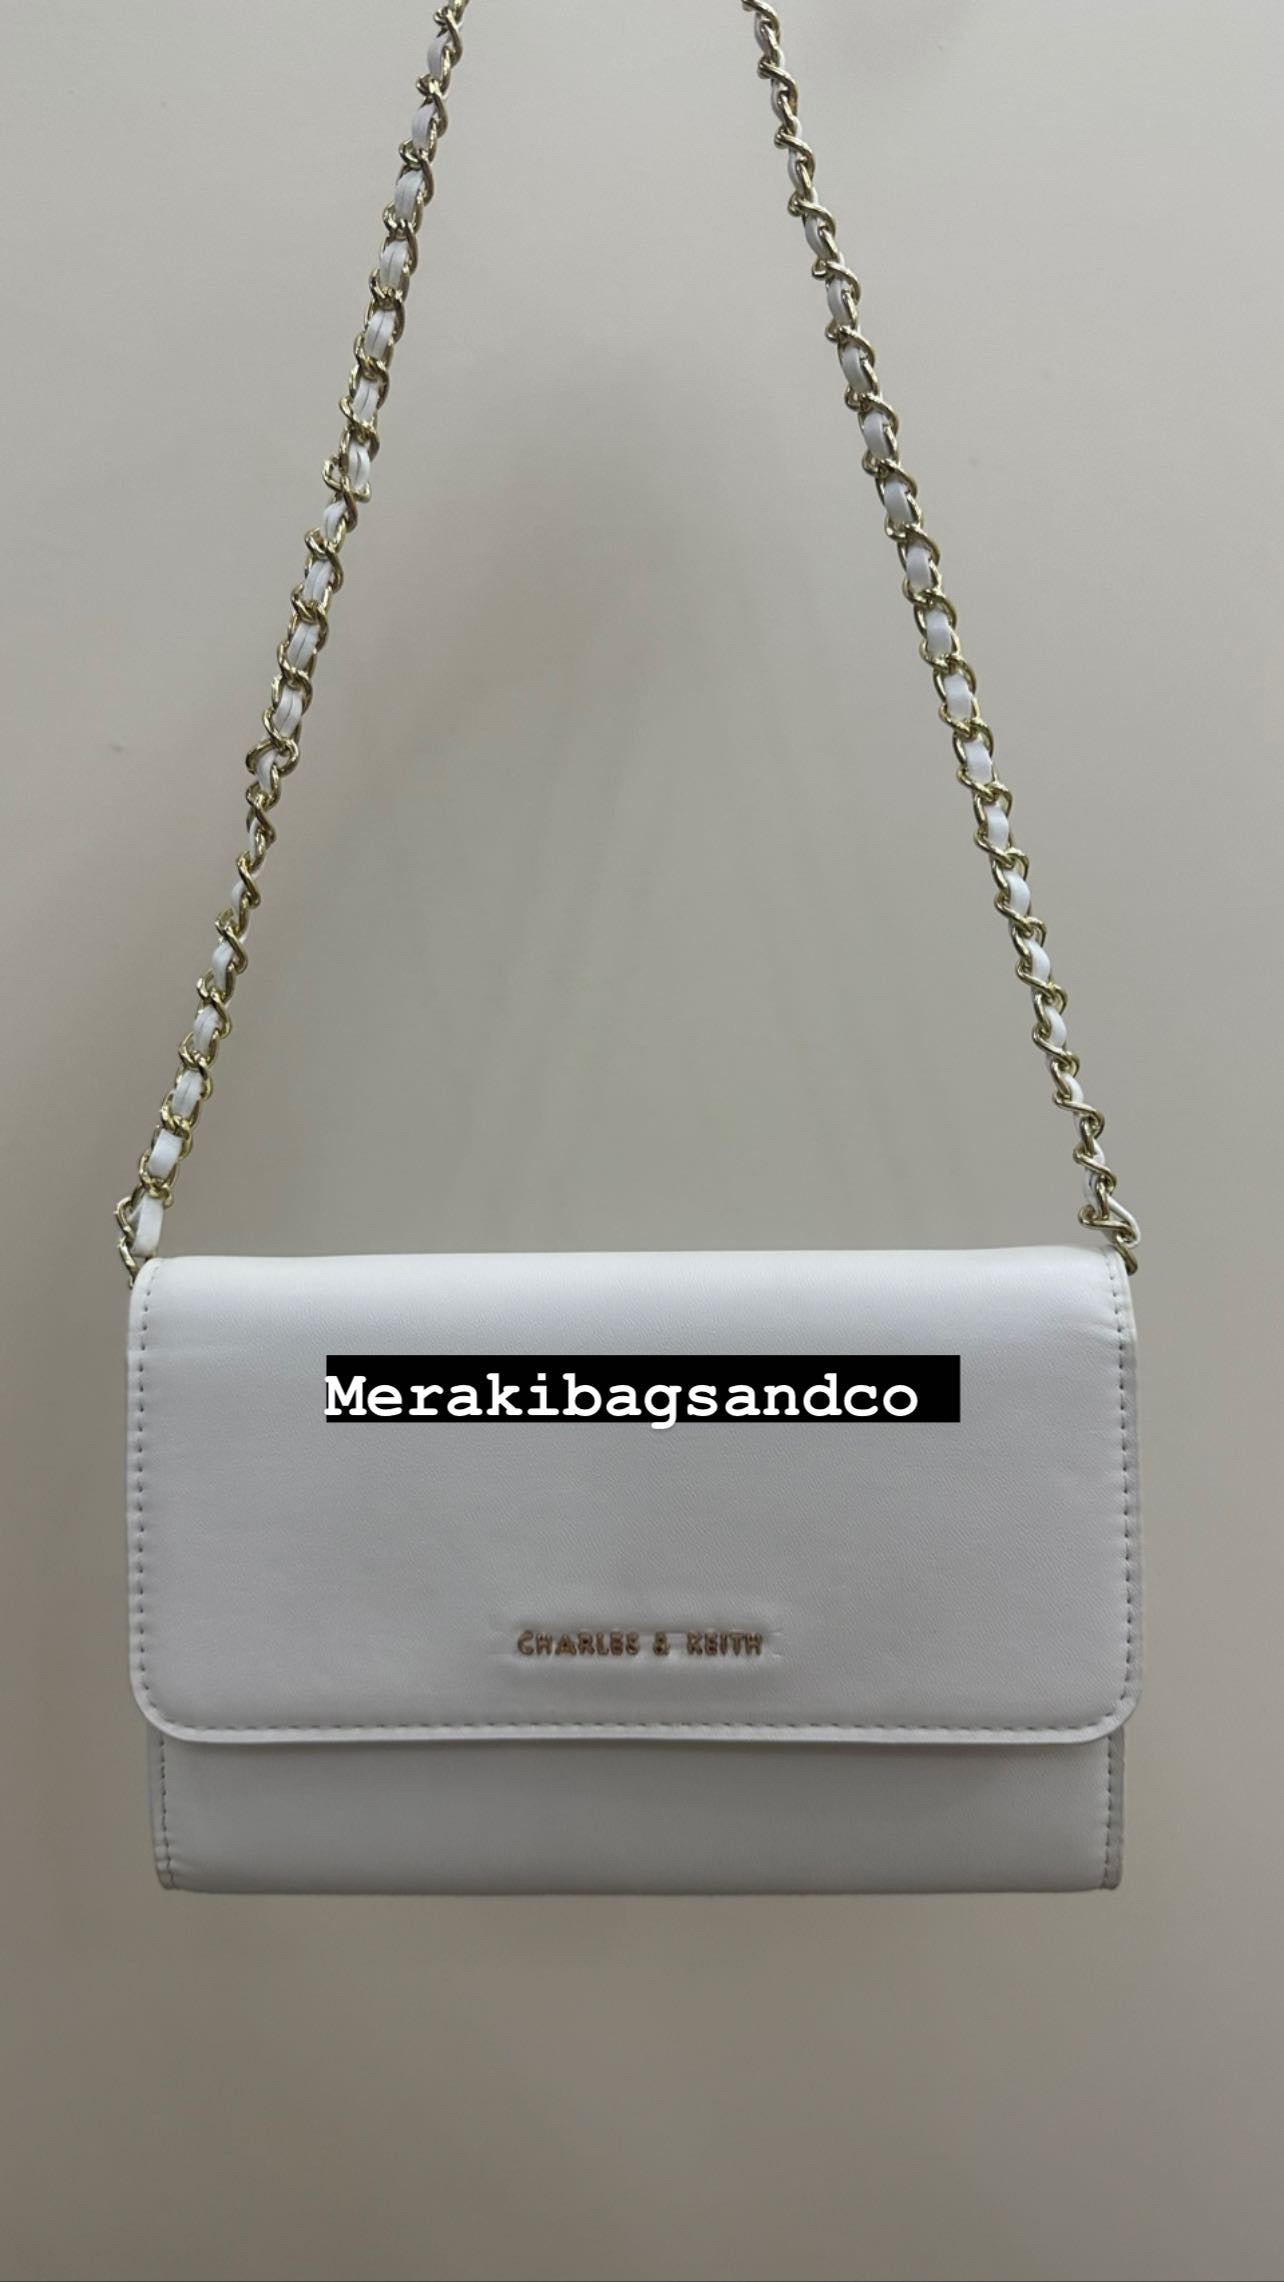 ORIGINAL CHARLES & KEITH WALLET ON CHAIN